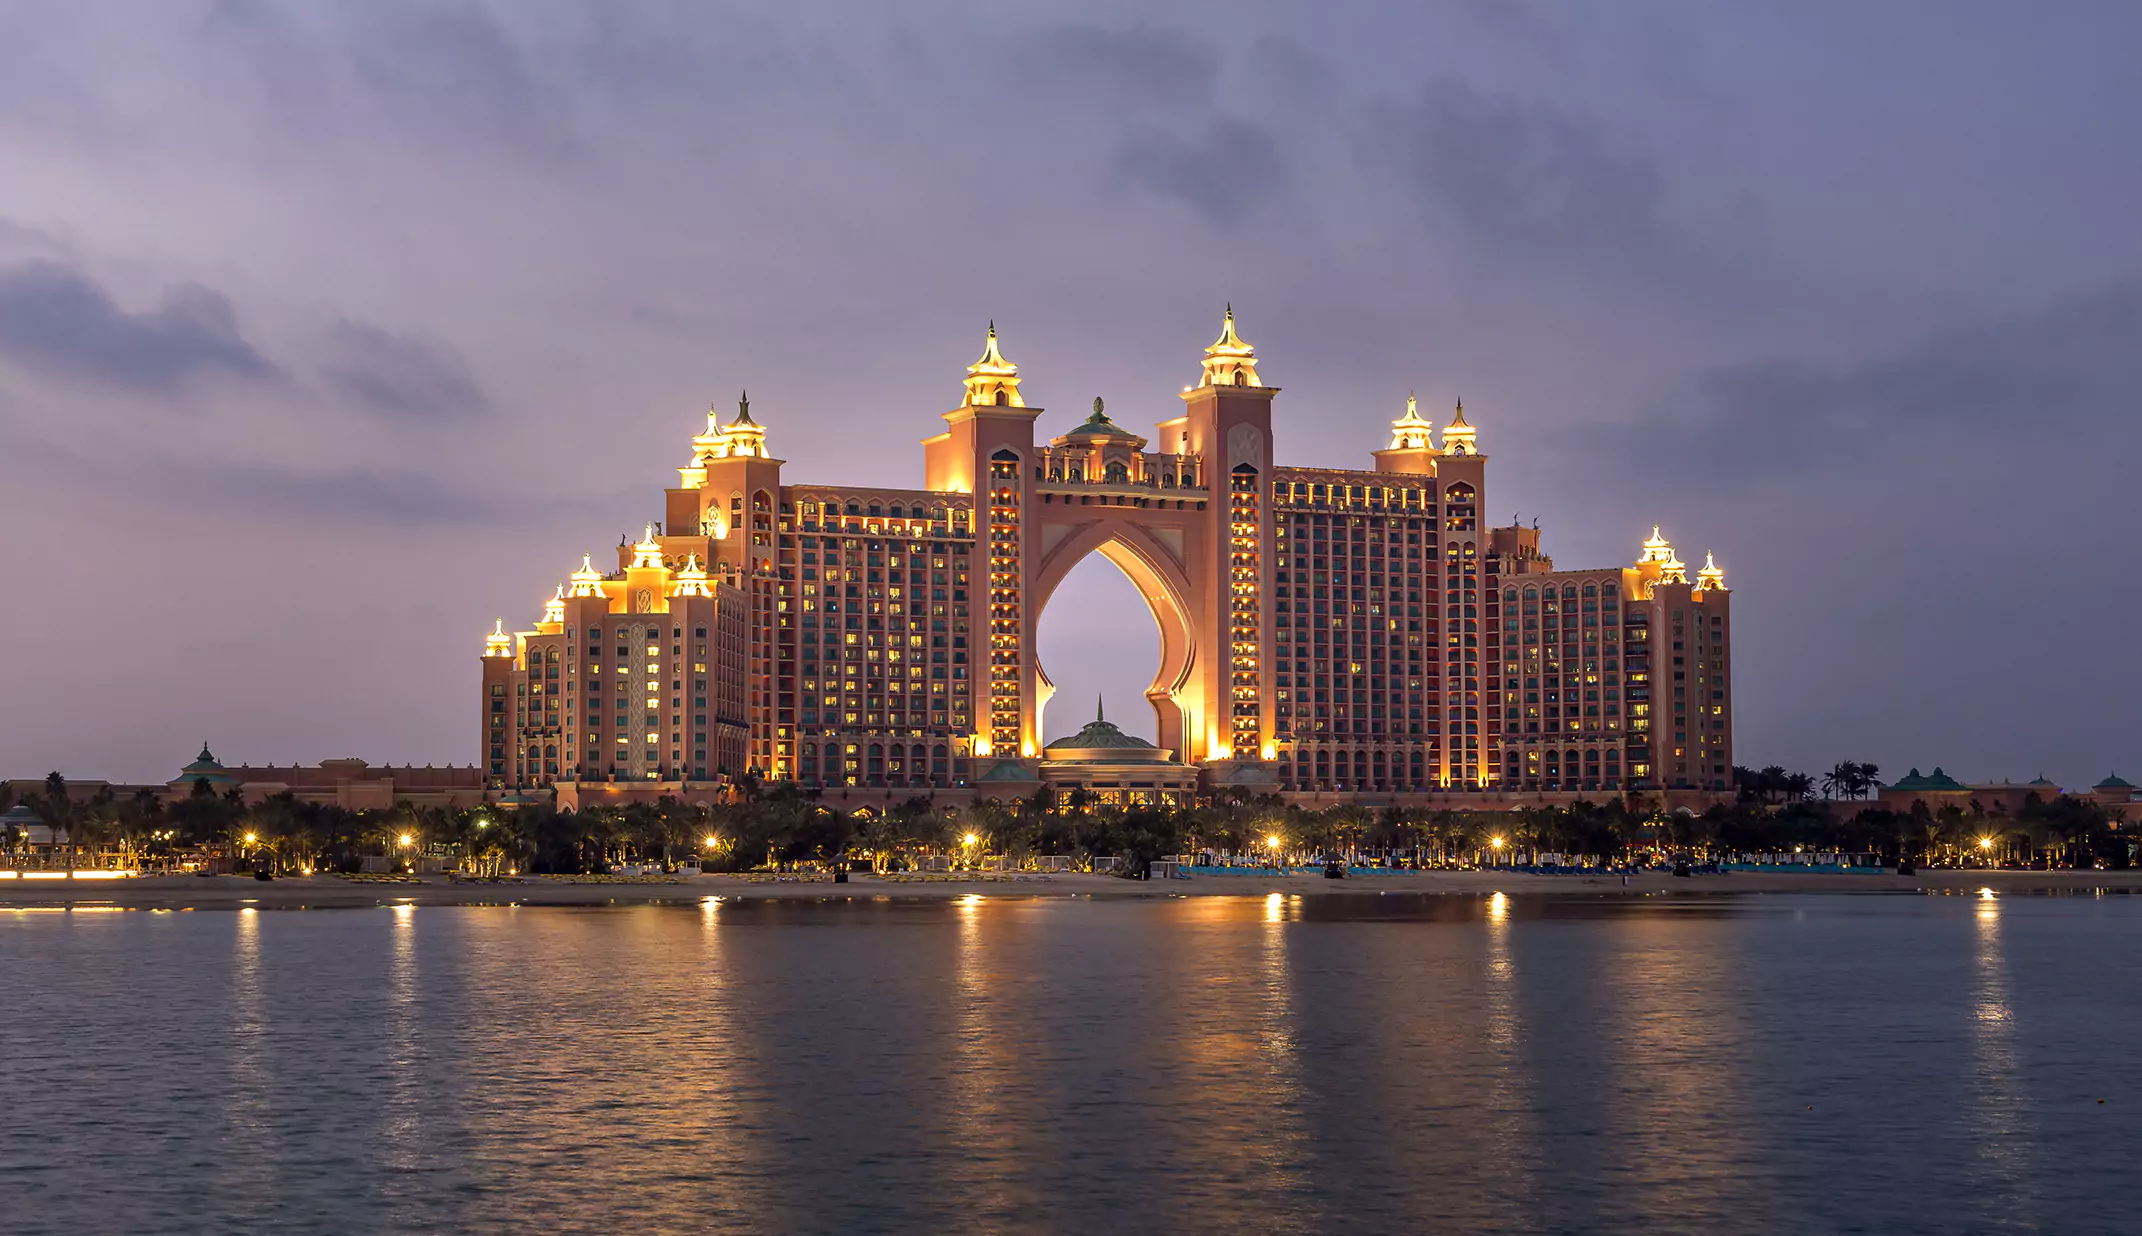 03 Nights of Luxury Living at Atlantis the Palm with Ocean King room